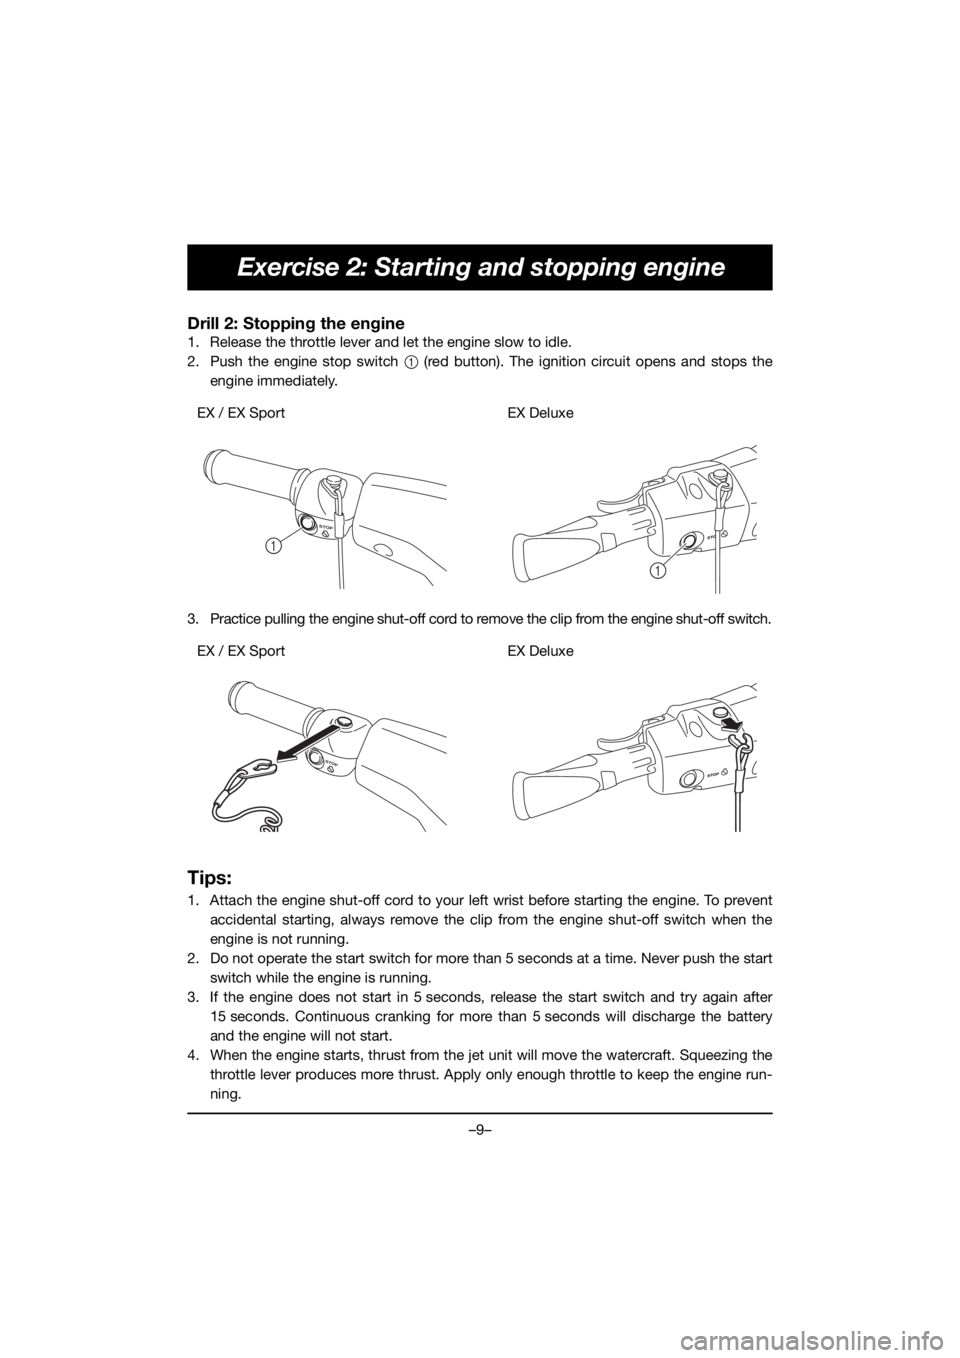 YAMAHA EX 2019  Bruksanvisningar (in Swedish) –9–
Exercise 2: Starting and stopping engine
Drill 2: Stopping the engine
1. Release the throttle lever and let the engine slow to idle.
2. Push the engine stop switch 1 (red button). The ignition